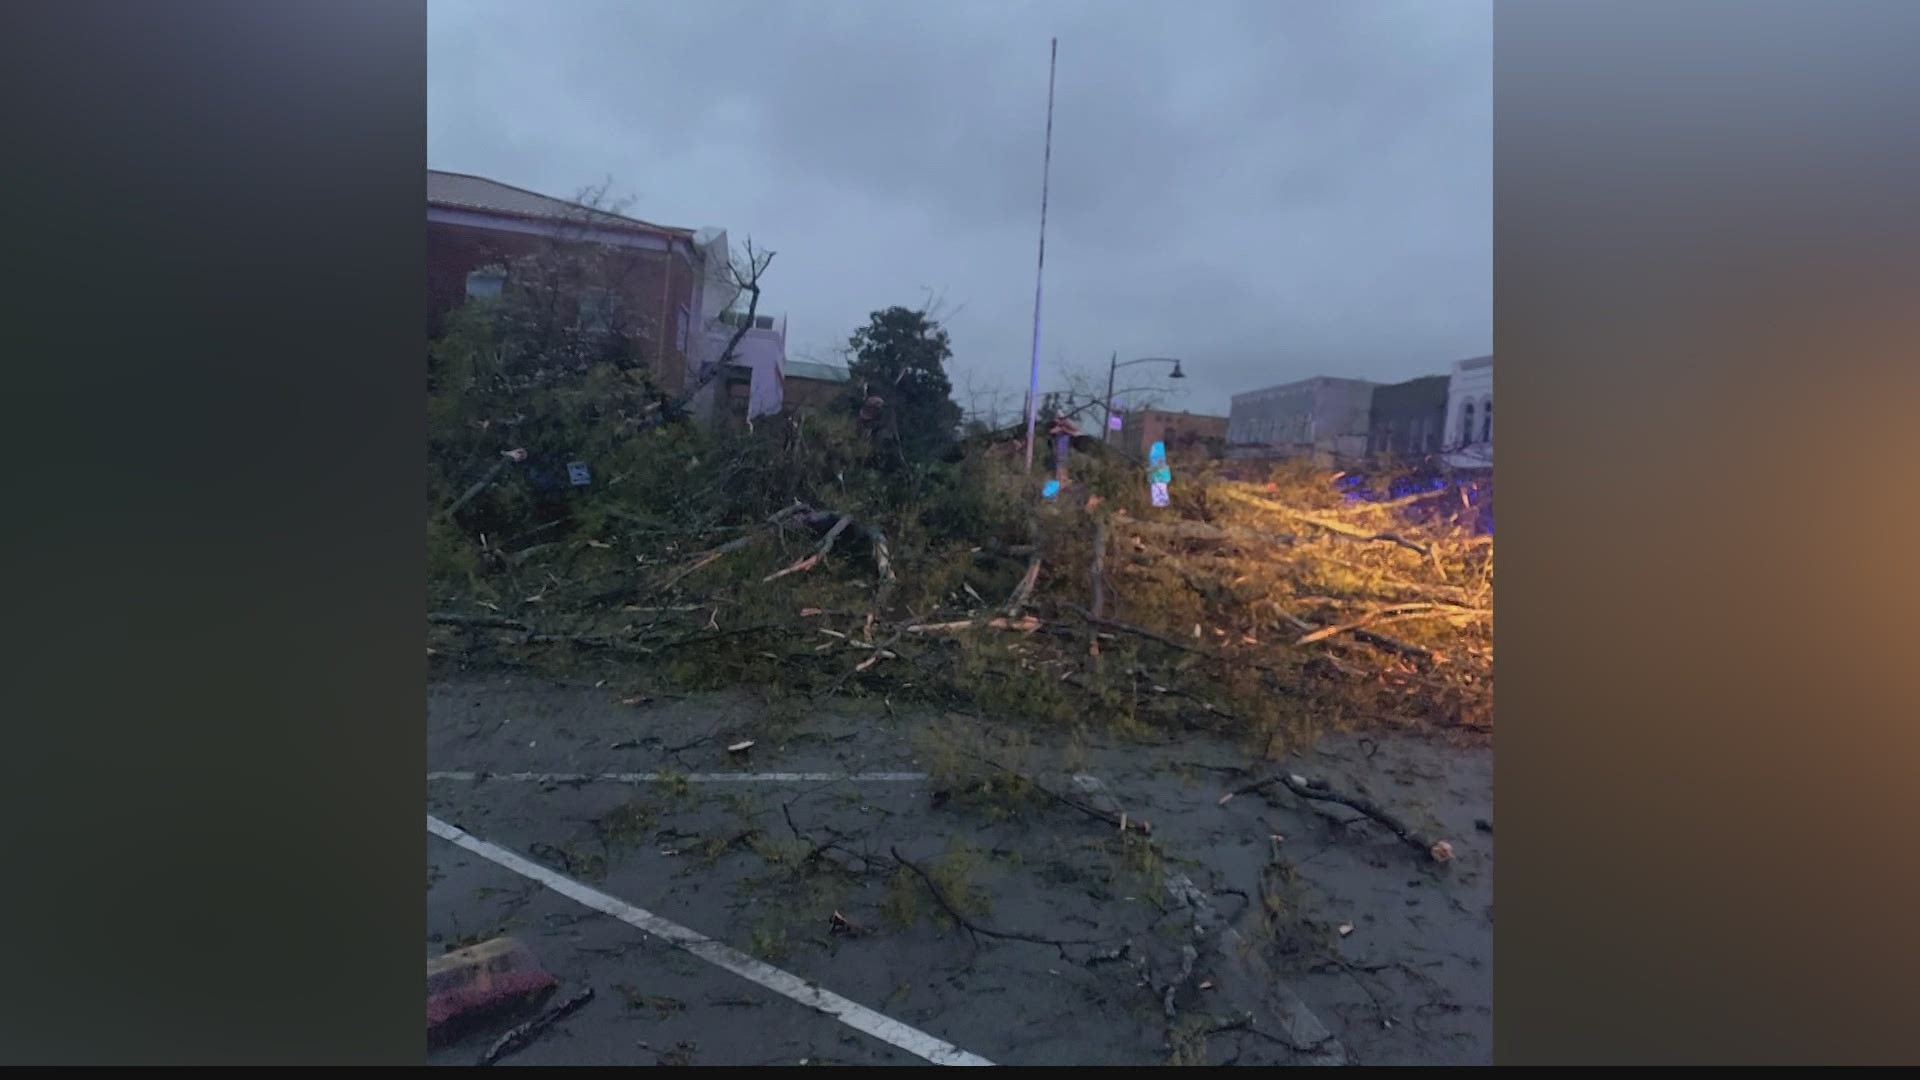 An early morning storm on March 28 caused damage in several parts of the Tennessee Valley, including Marshall County.